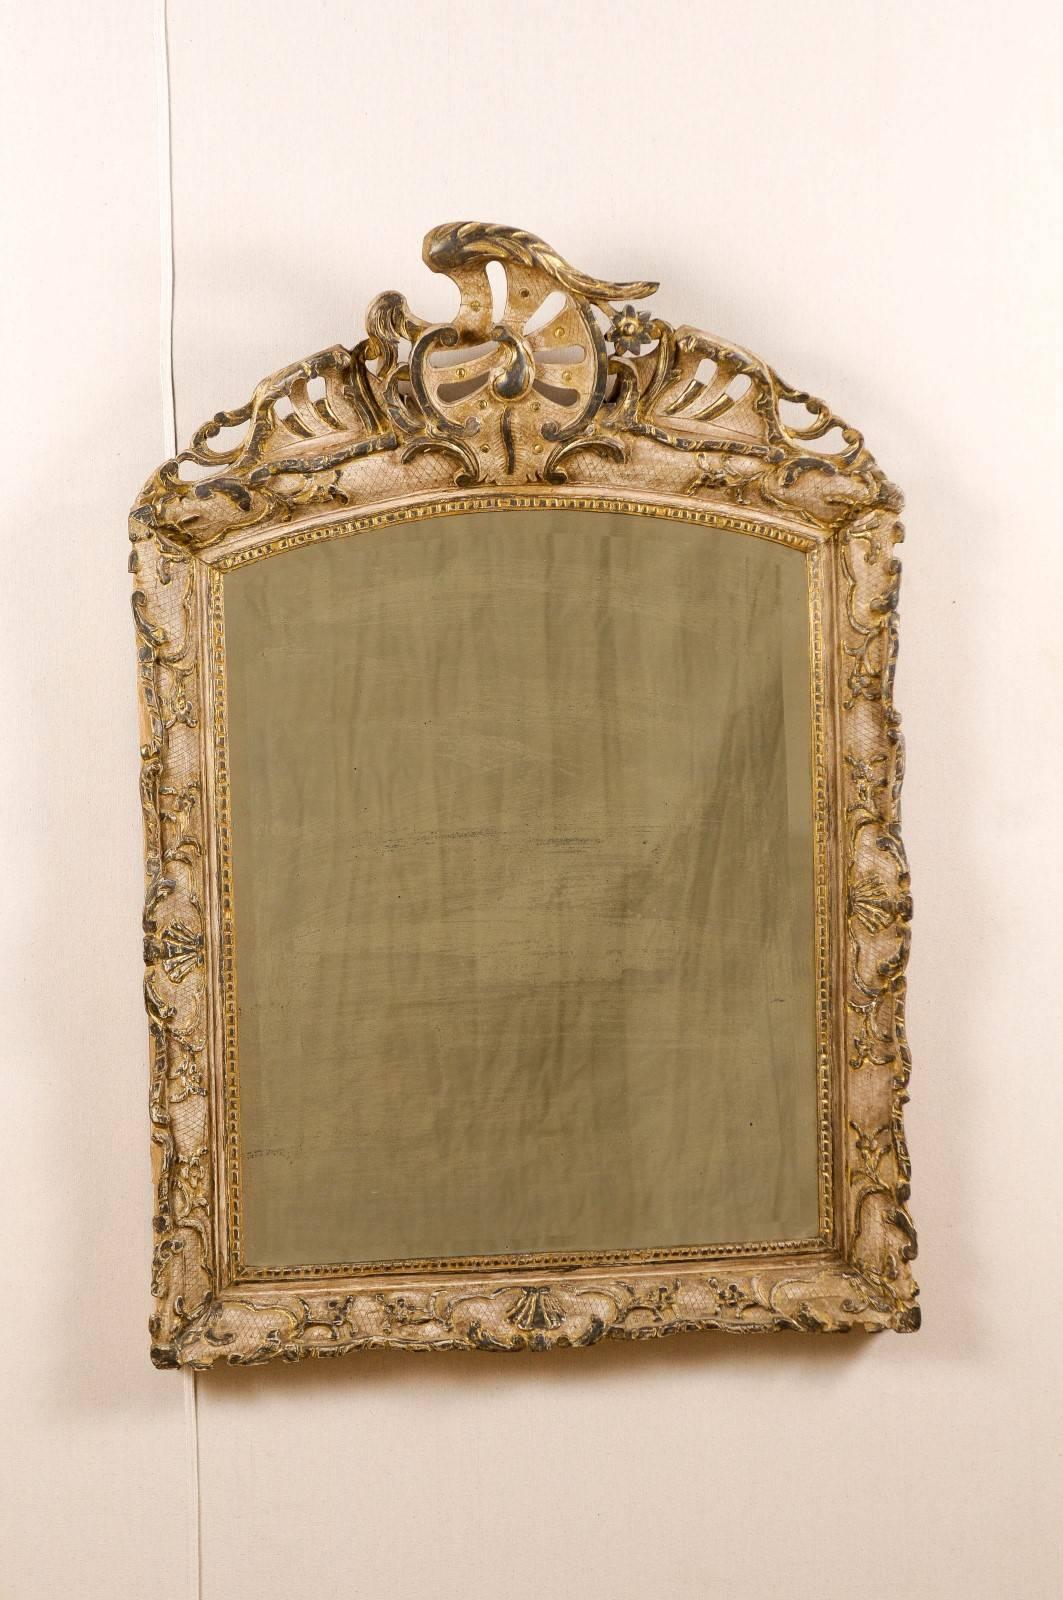 Gilt Italian Early 19th C. Rococo Style Mirror with Beautiful Pierce-Carved Crest For Sale